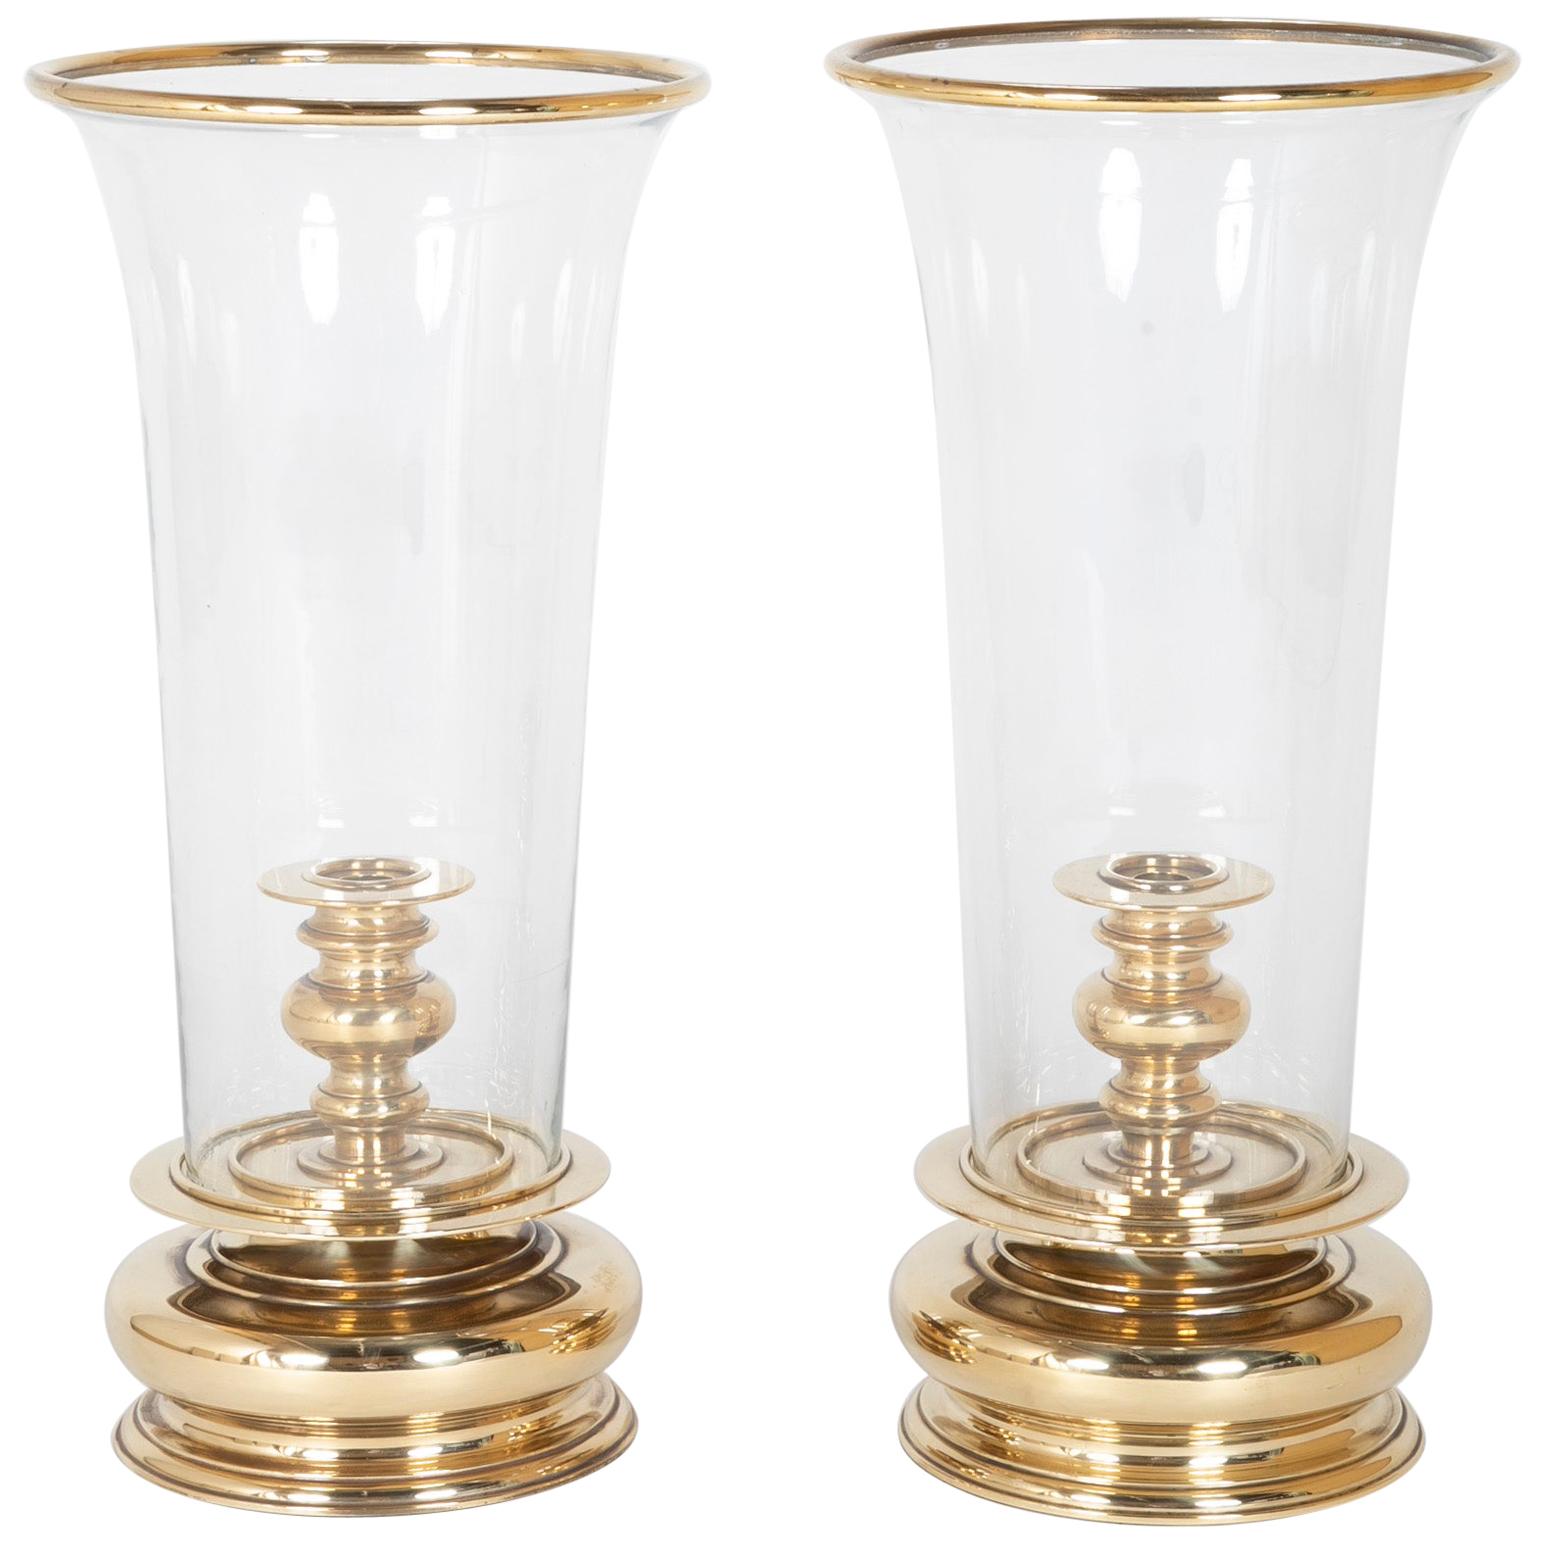 Pair of Monumental Brass Hurricane Lamps by Chapman